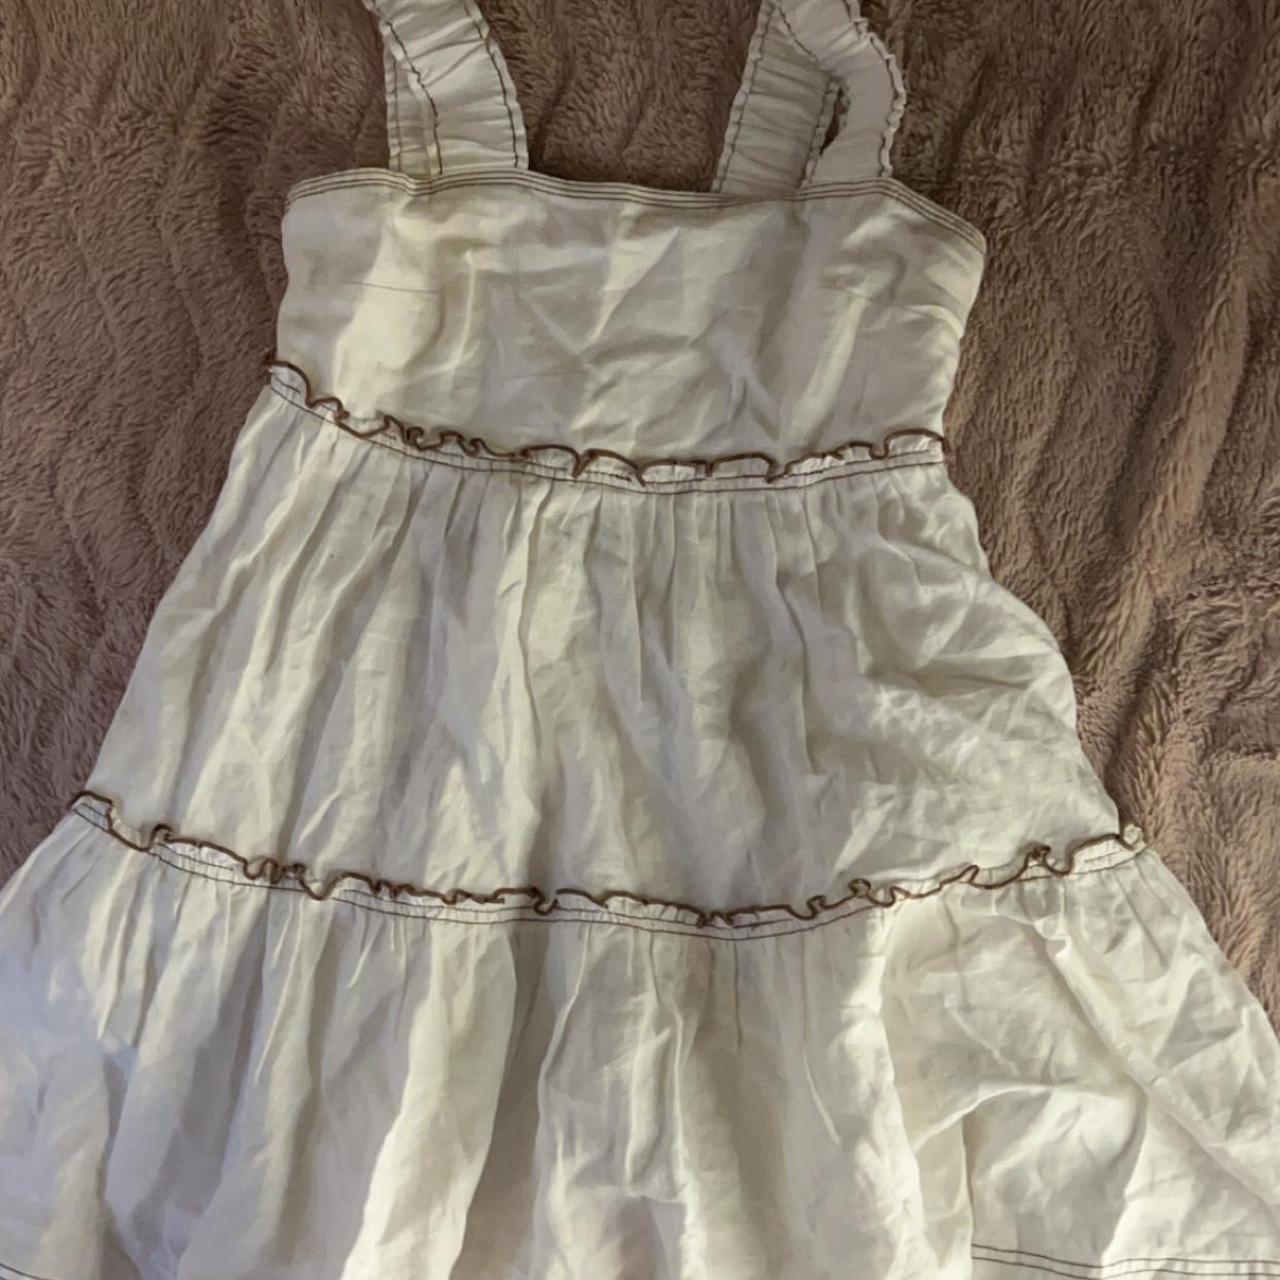 2000s Babydoll dress , prices negotiable 💘 Worn... - Depop